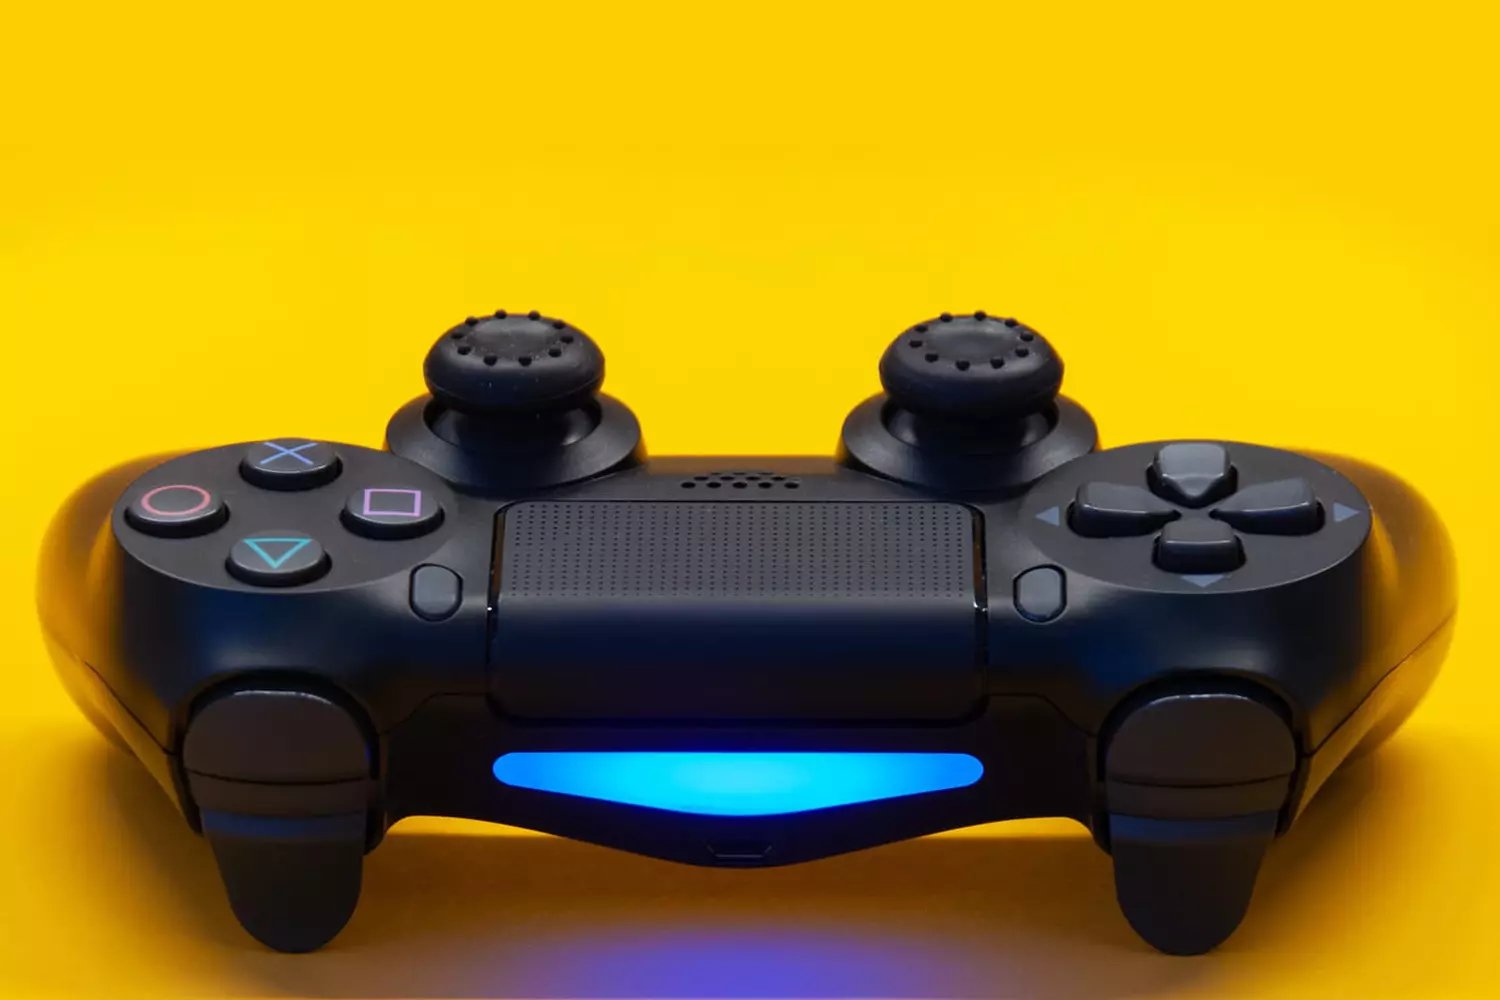 How To Turn Off PS4 Controller